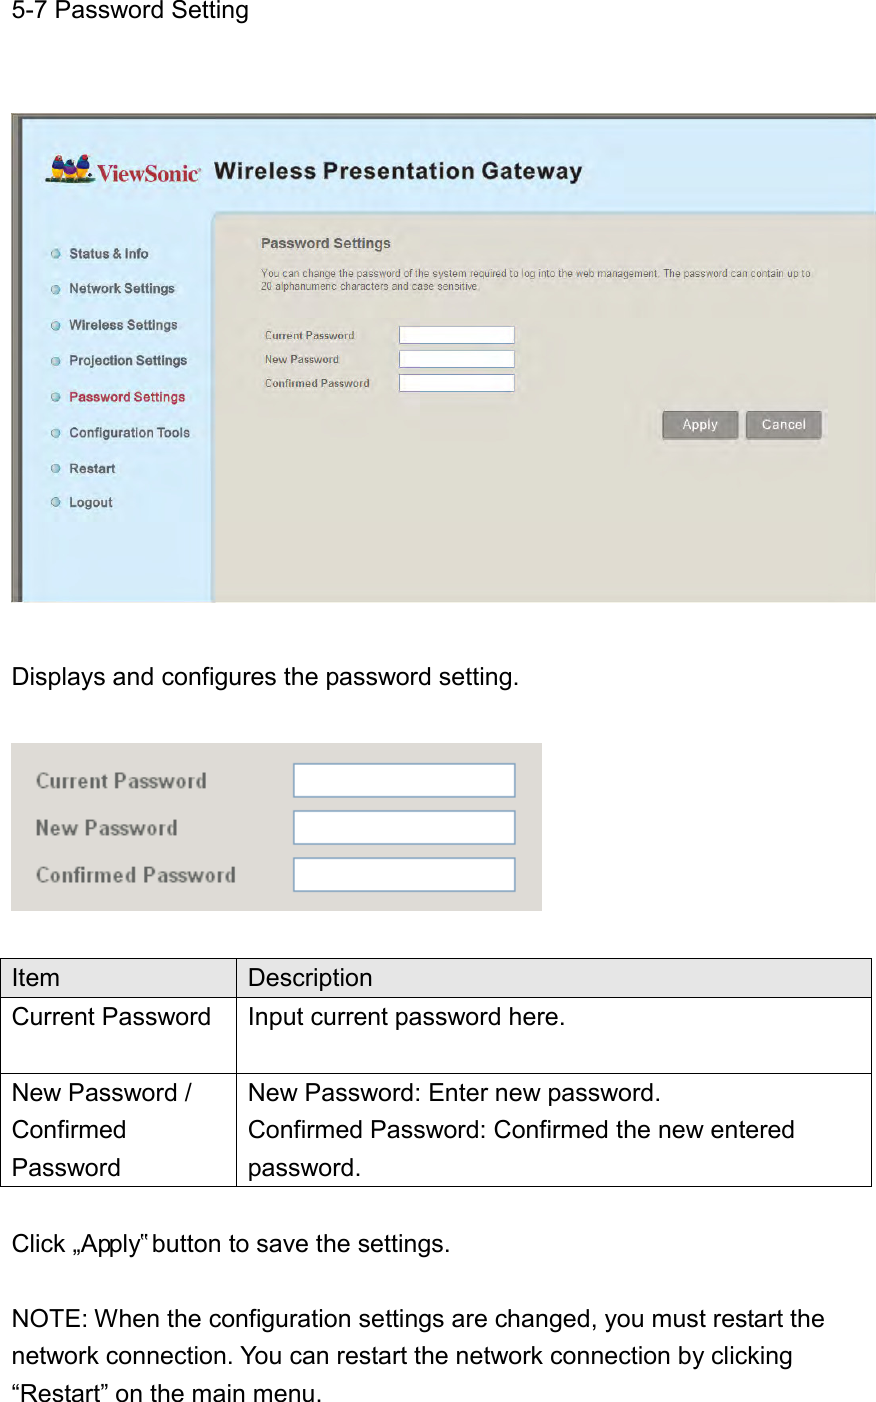 5-7 Password Setting    Displays and configures the password setting.    Item Description Current Password Input current password here.  New Password /   Confirmed Password New Password: Enter new password. Confirmed Password: Confirmed the new entered password.    Click „Apply‟ button to save the settings.  NOTE: When the configuration settings are changed, you must restart the network connection. You can restart the network connection by clicking “Restart” on the main menu. 